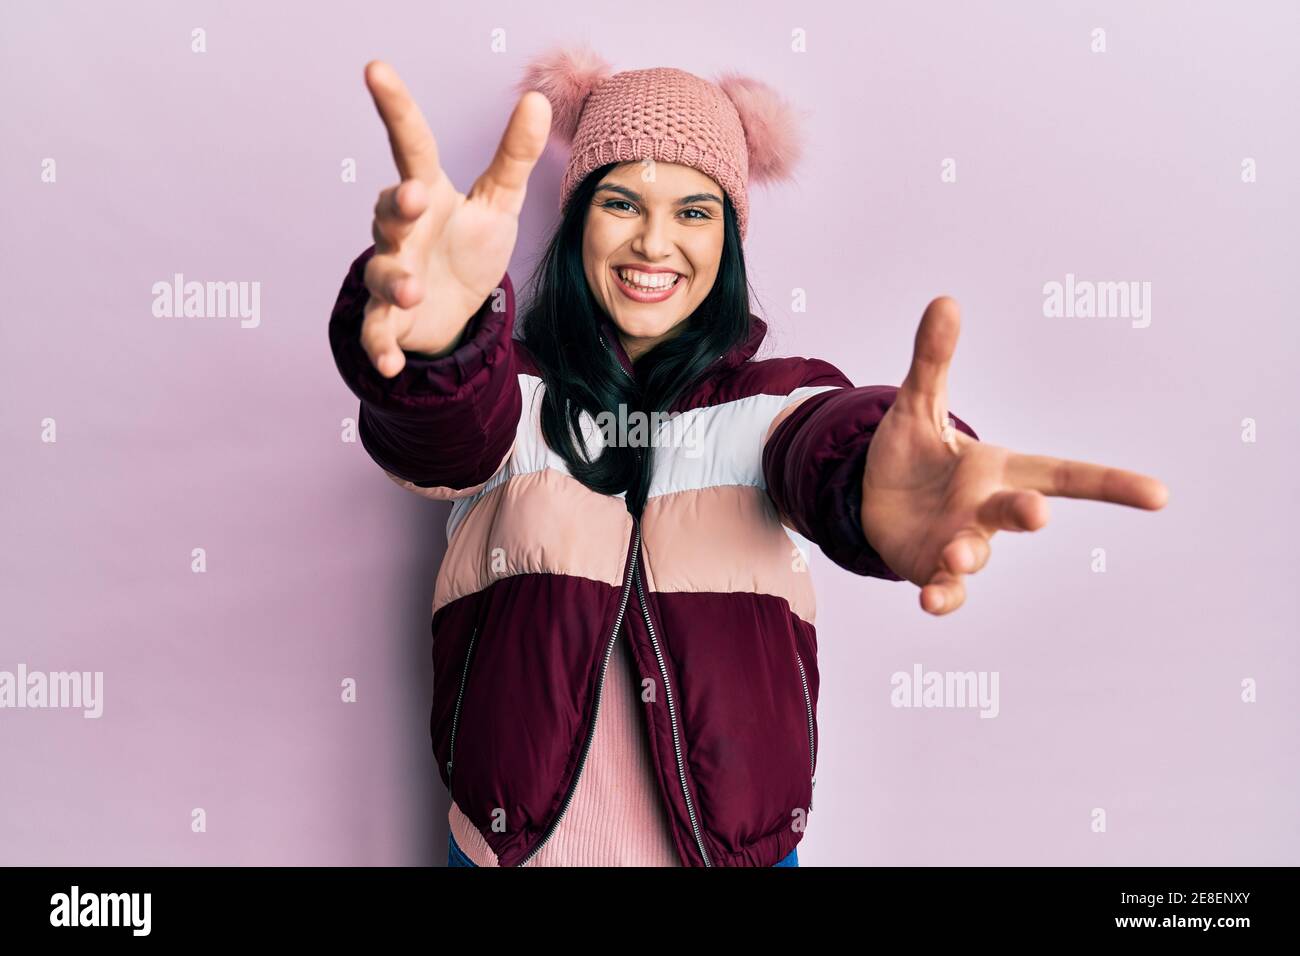 Young hispanic woman wearing wool winter sweater and cap looking at the camera smiling with open arms for hug. cheerful expression embracing happiness Stock Photo